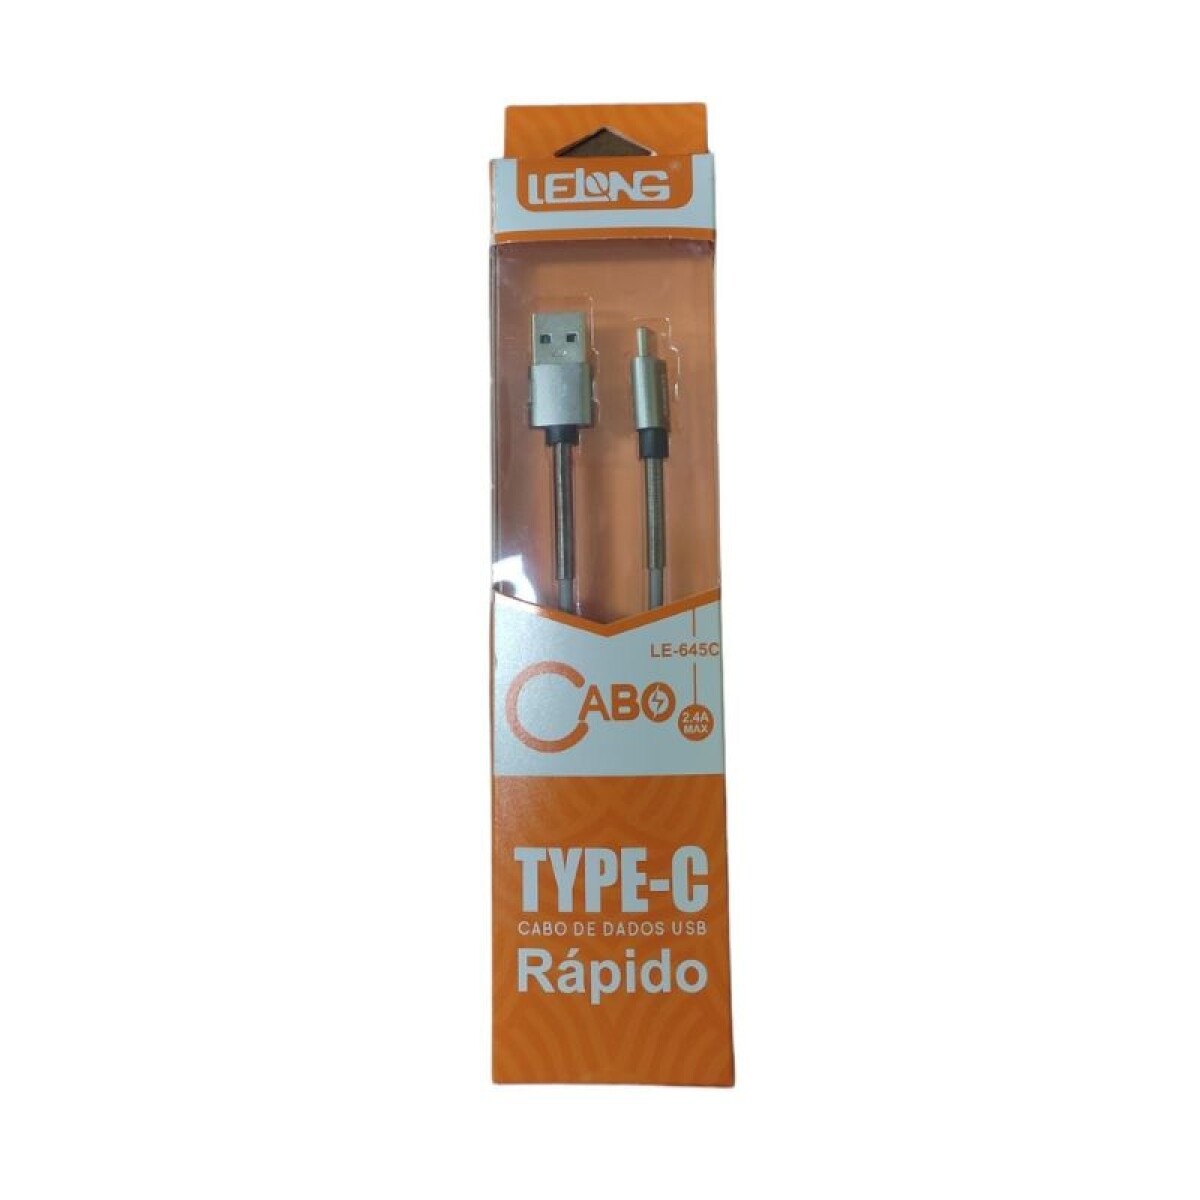 CABLE TIPO C LE-623C 